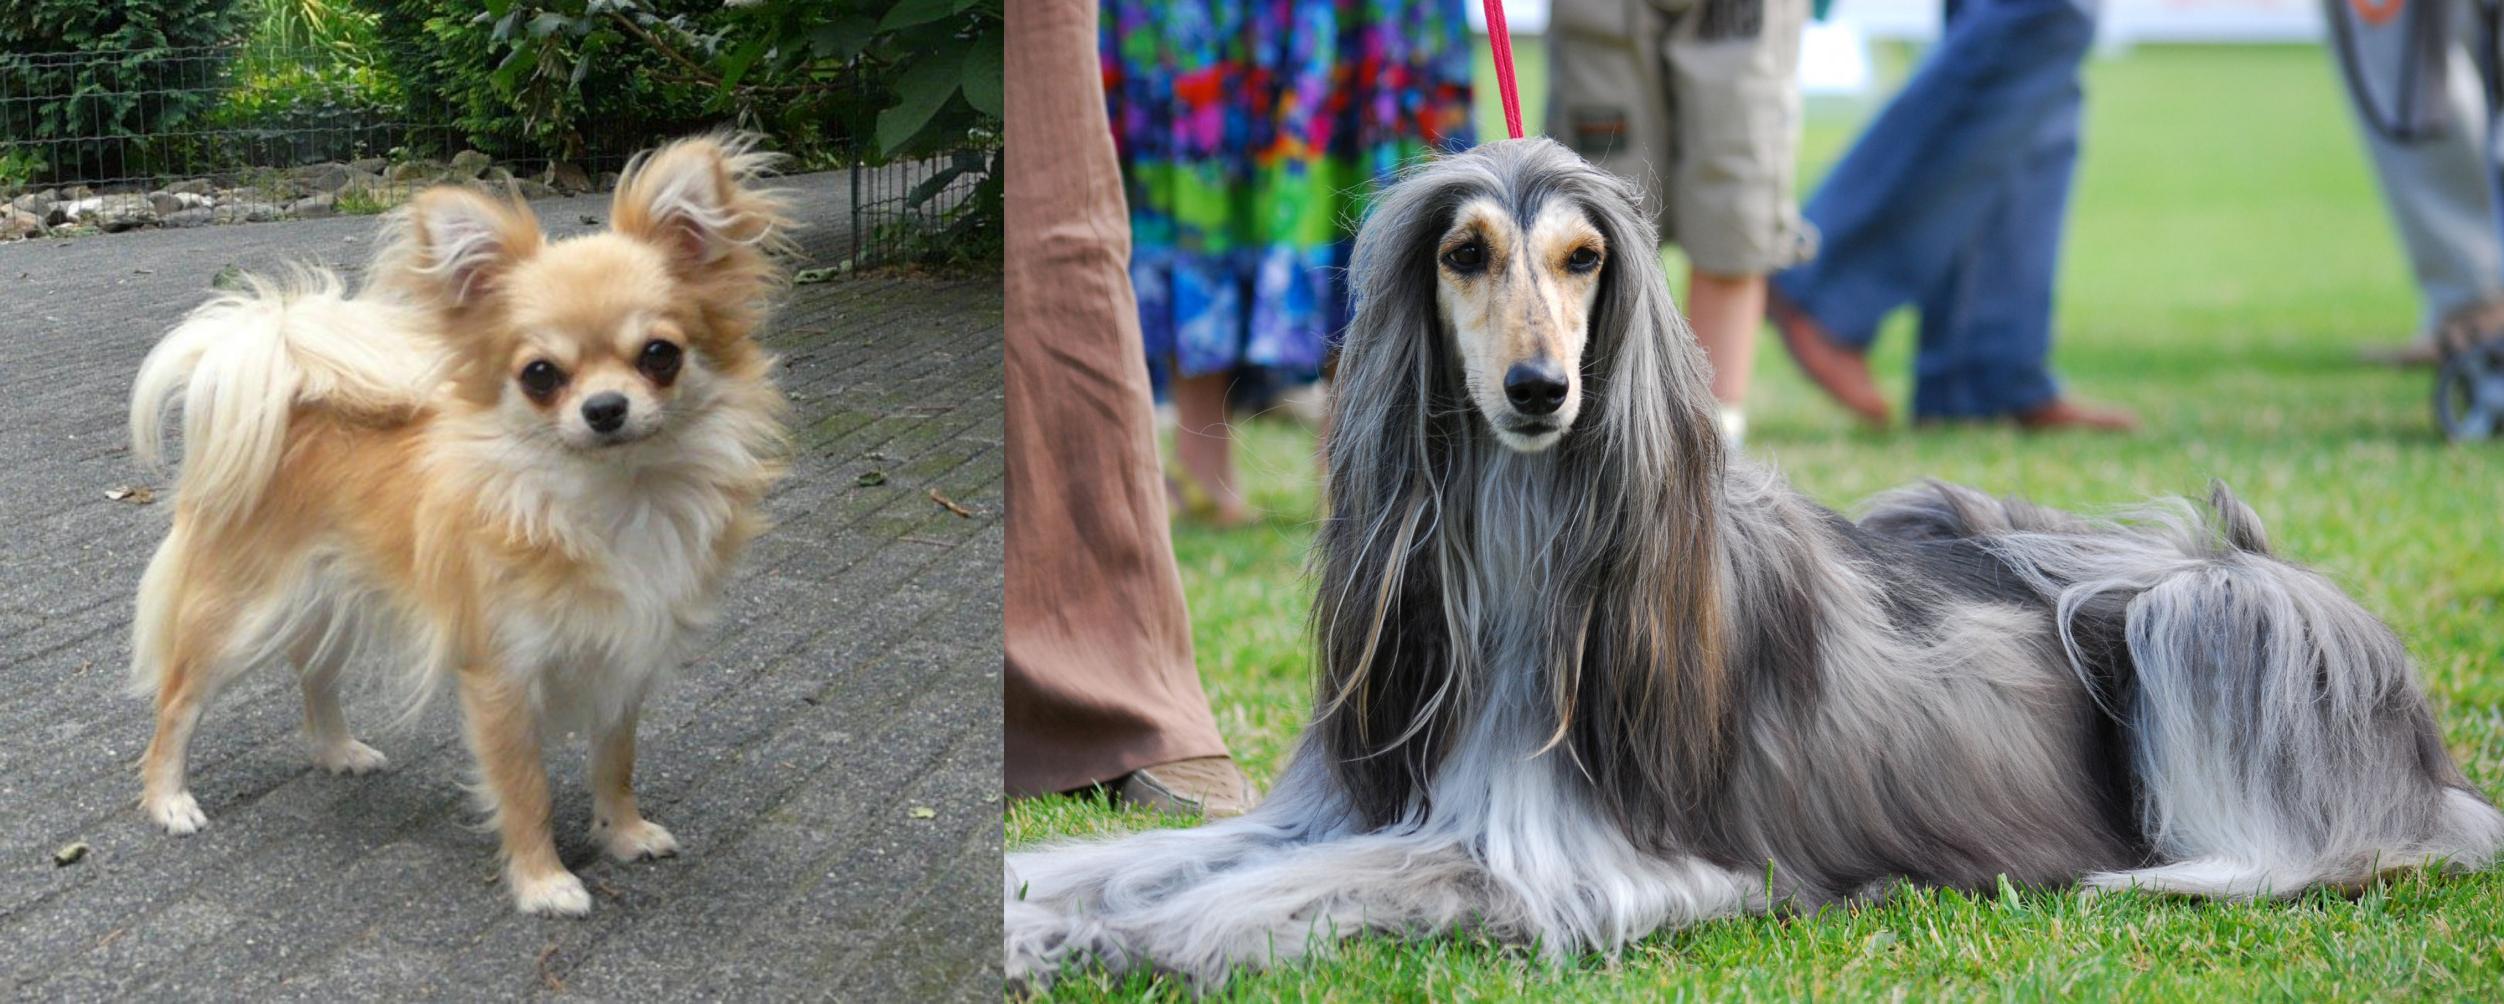 Long Haired Chihuahua Vs Afghan Hound Breed Comparison